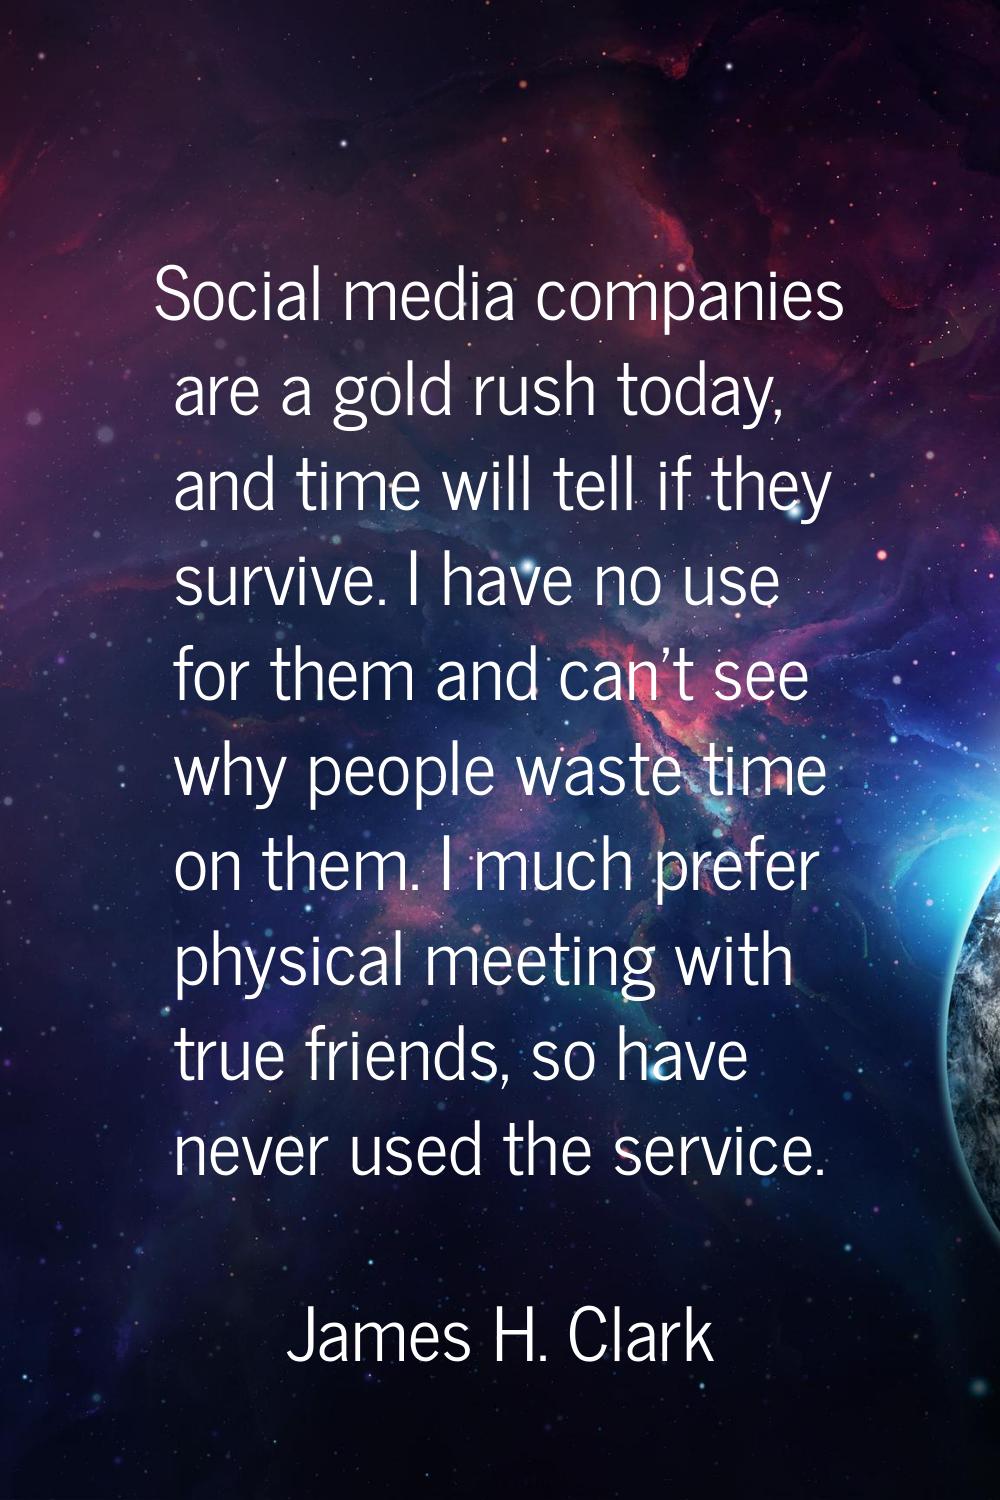 Social media companies are a gold rush today, and time will tell if they survive. I have no use for